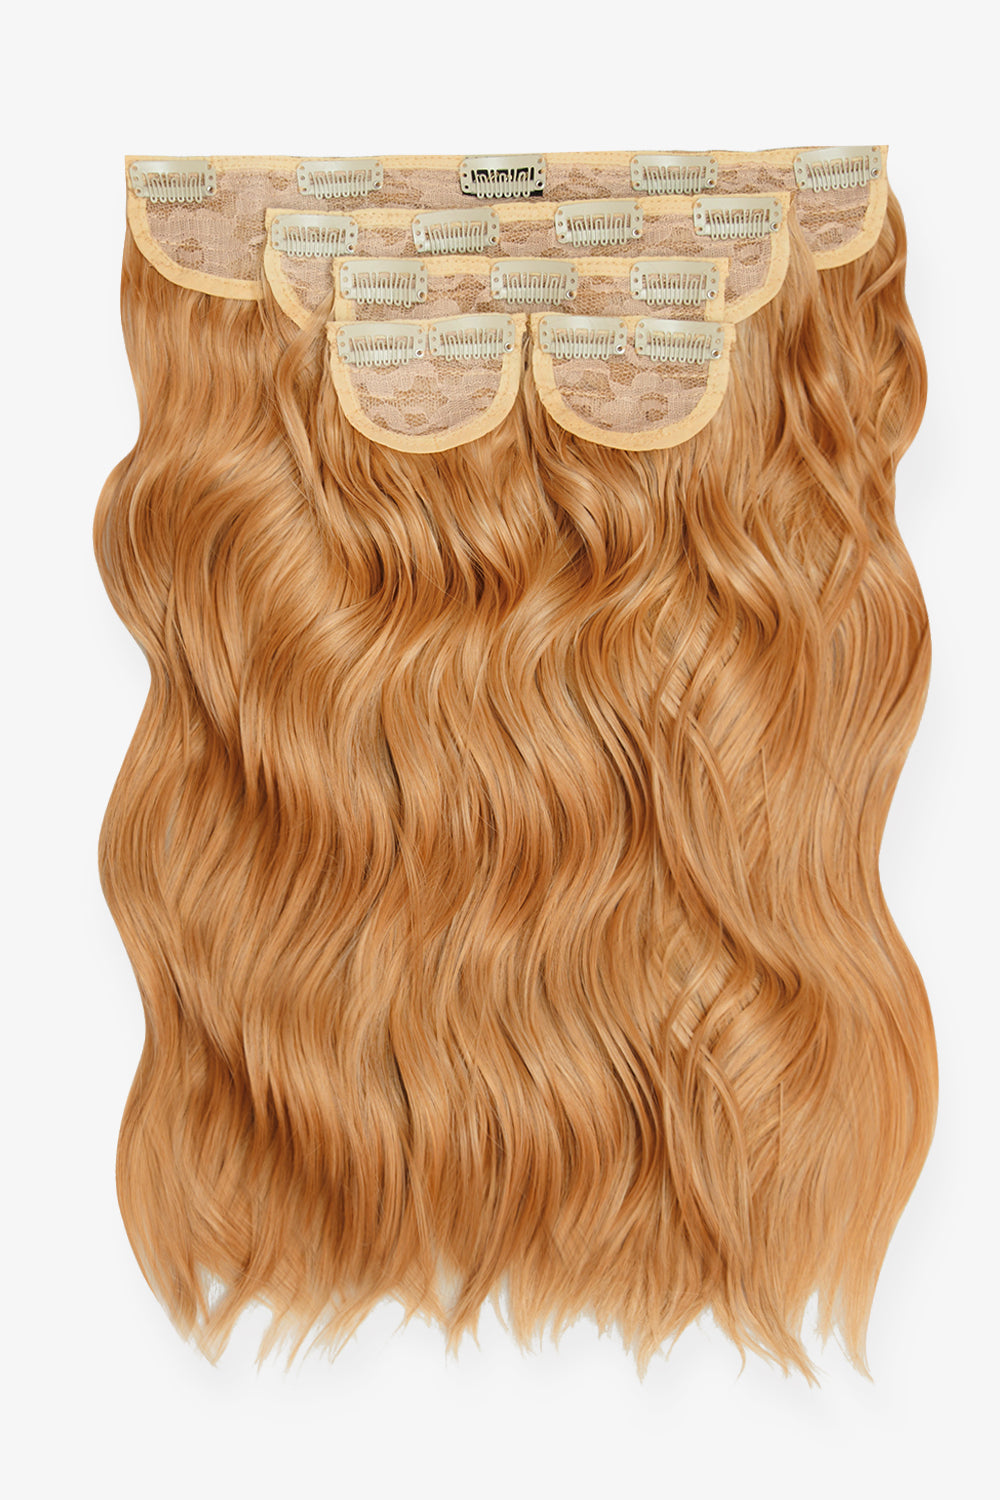 Super Thick 16’’ 5 Piece Brushed Out Wave Clip In Hair Extensions + Hair Care Bundle - Strawberry Blonde